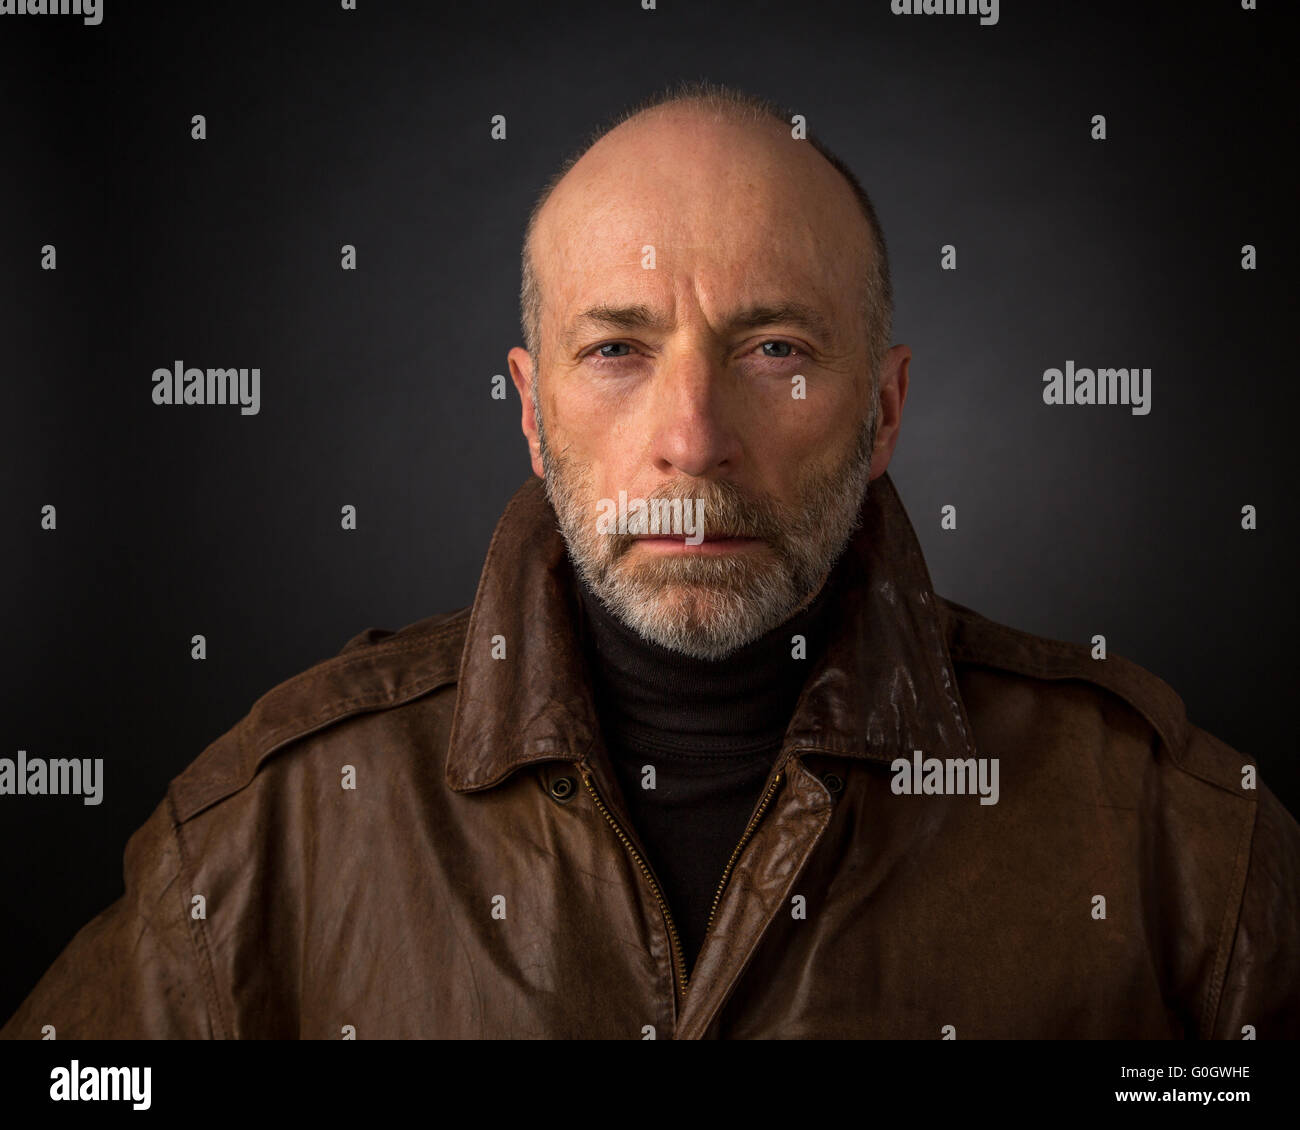 serious and focused senior man in leather jacket - a headshot against a black background Stock Photo